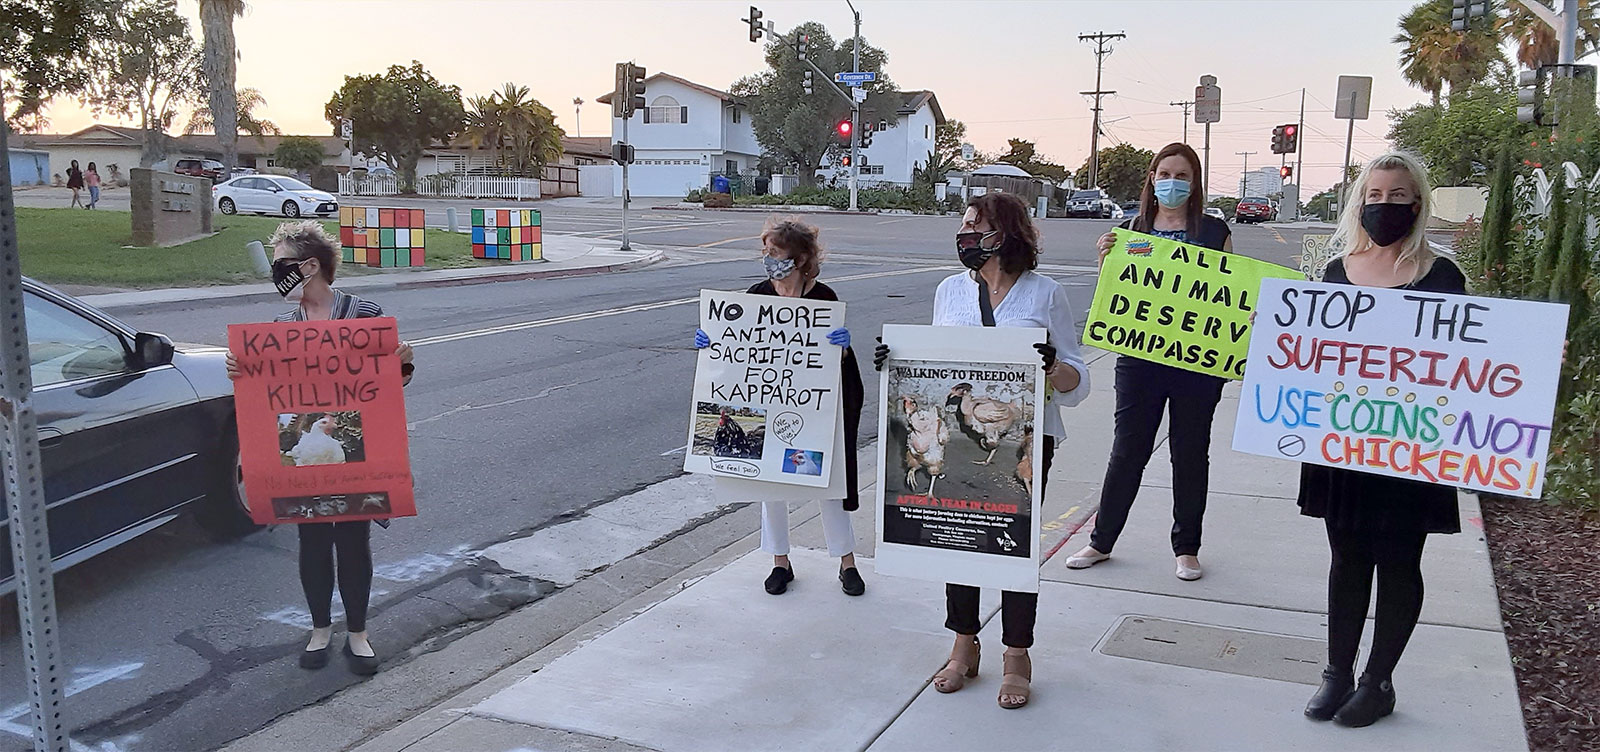 Protesting the use of chickens as Kaporos